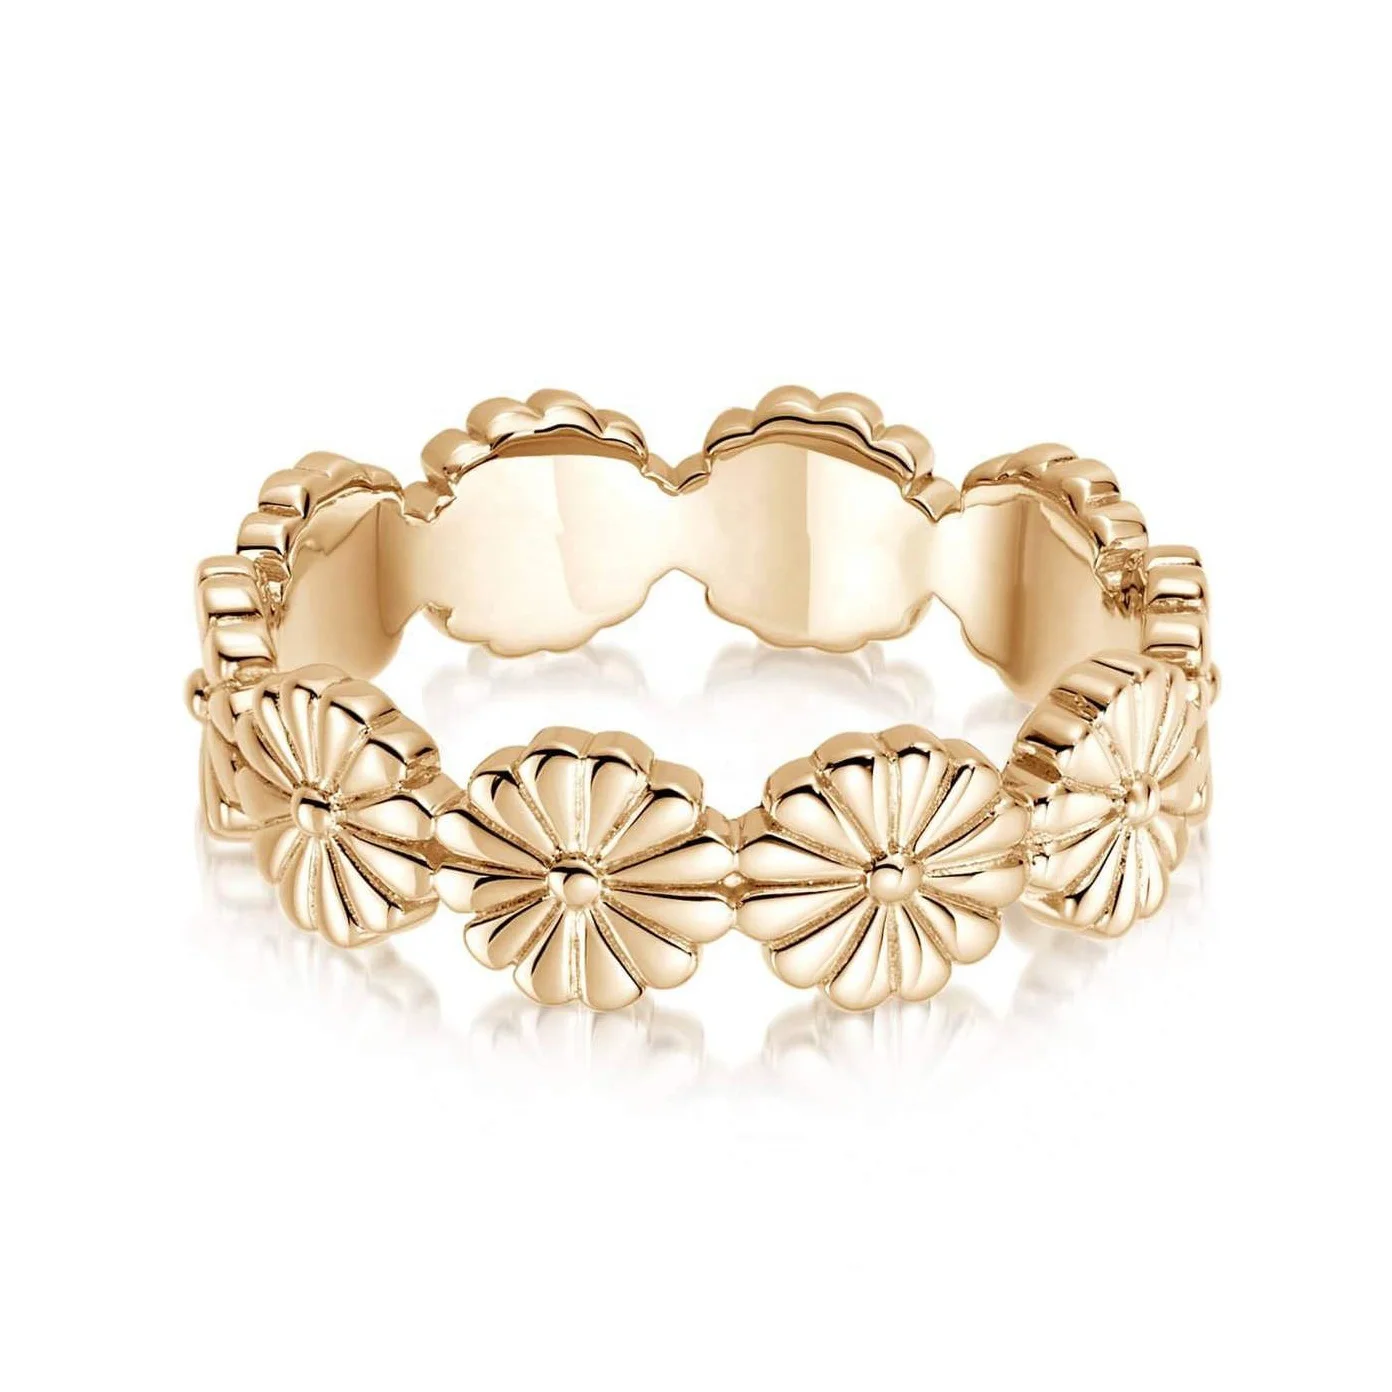 

Gemnel fashion jewelry bloom crown band 925 sterling silver 18k gold vermeil flower rings